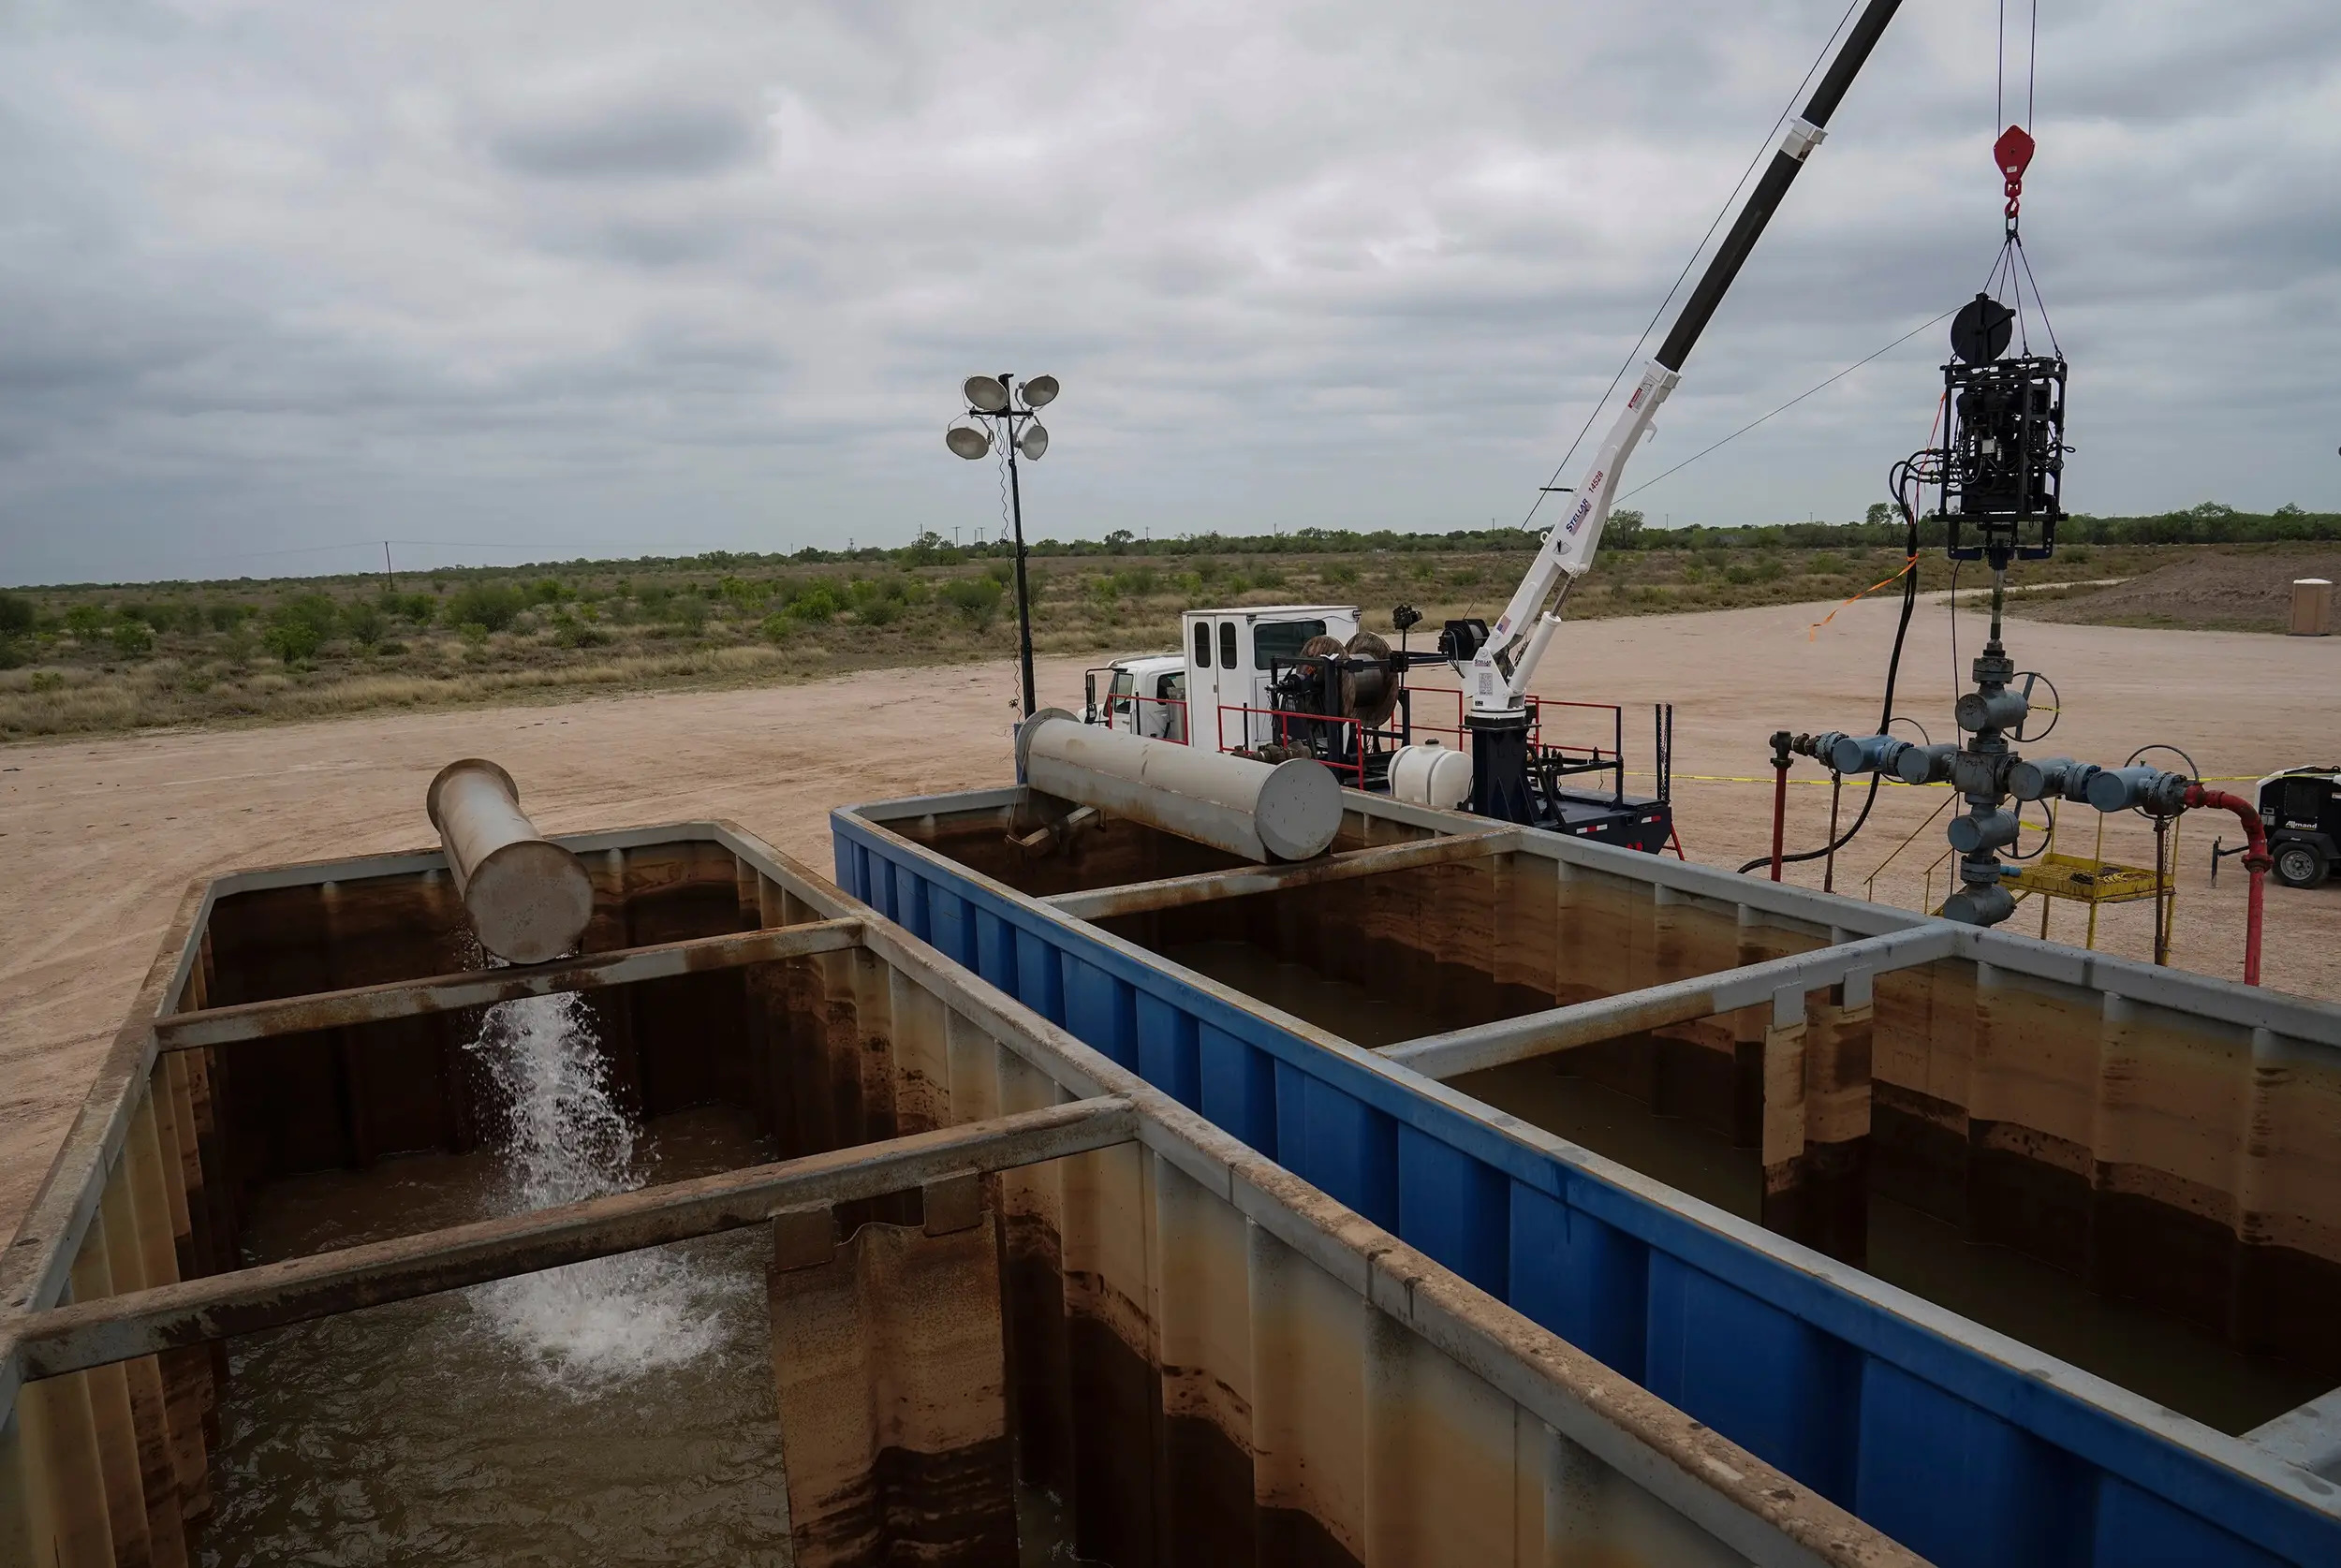 The pressurized water, which was pumped underground and later released to the surface through the well on the right, at the Starr County demonstration on March 22, 2023.